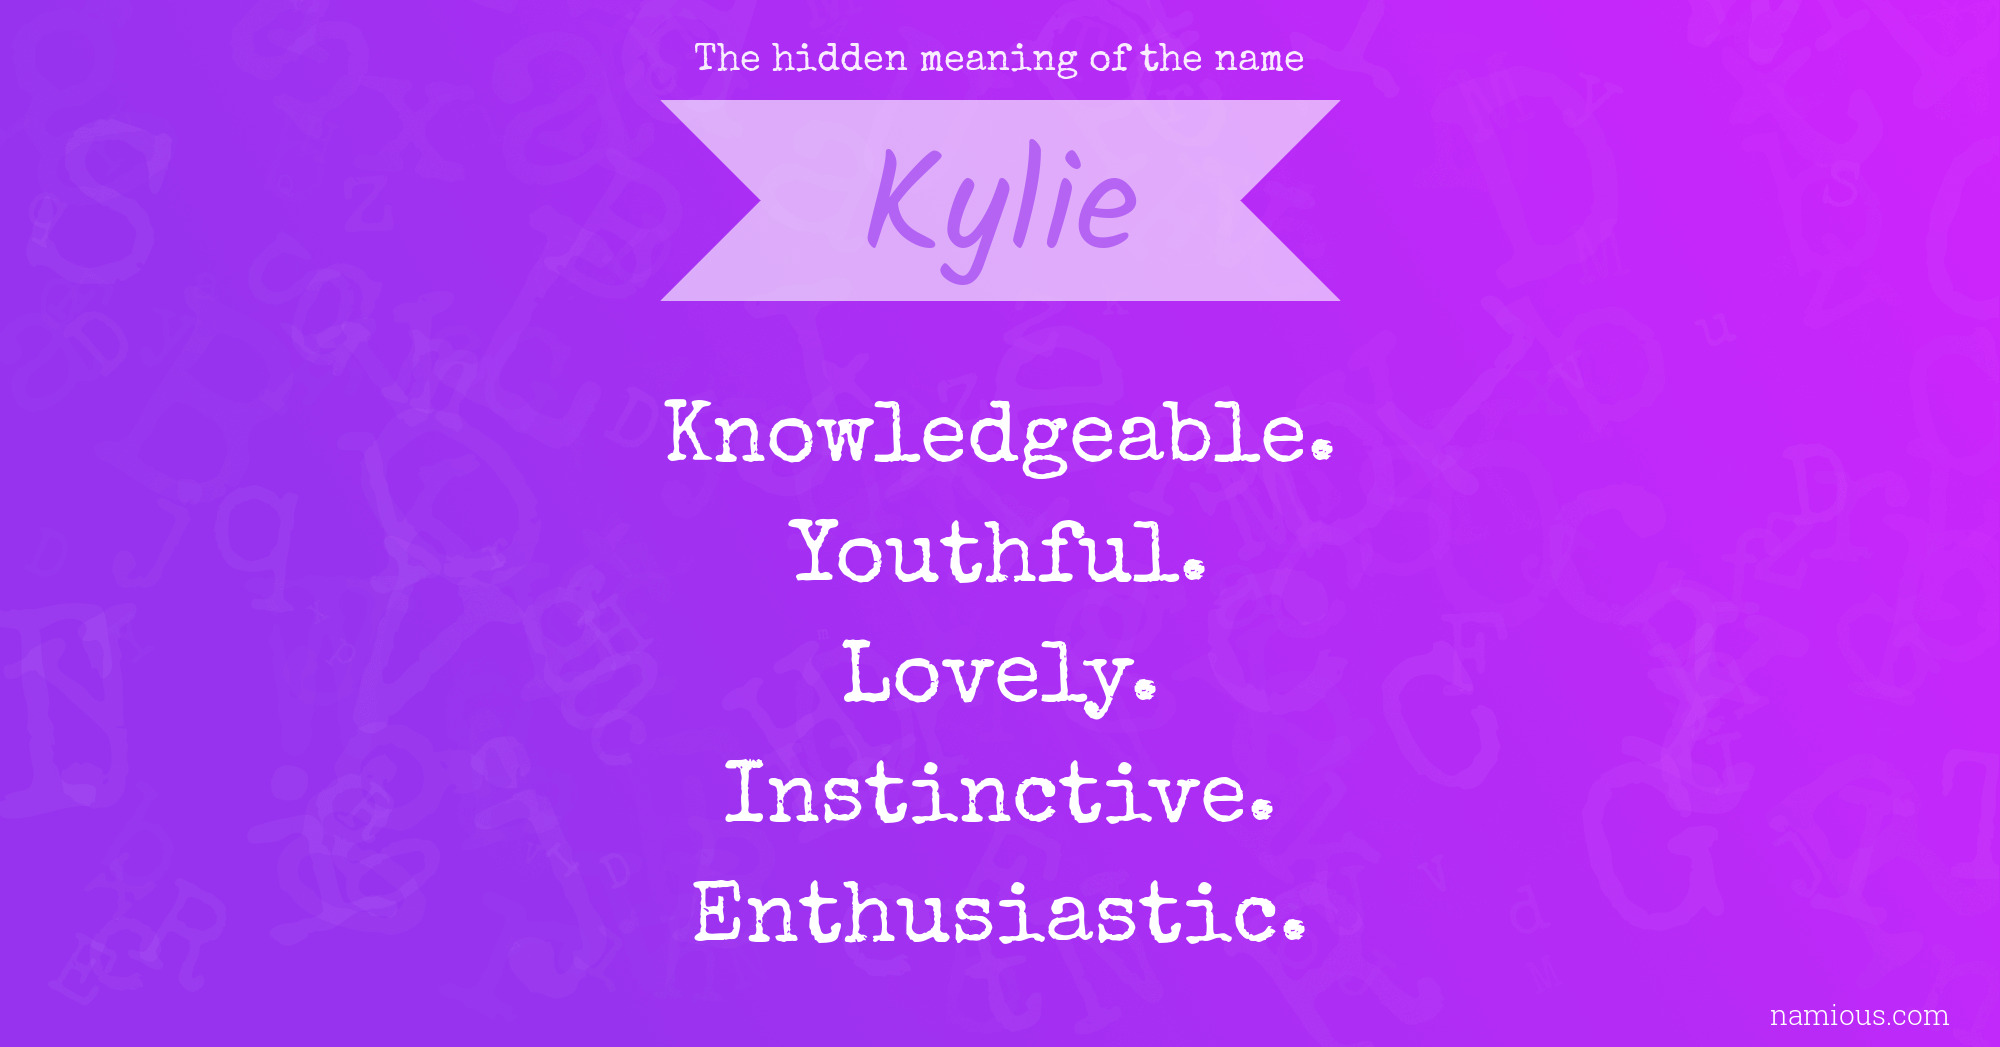 The hidden meaning of the name Kylie